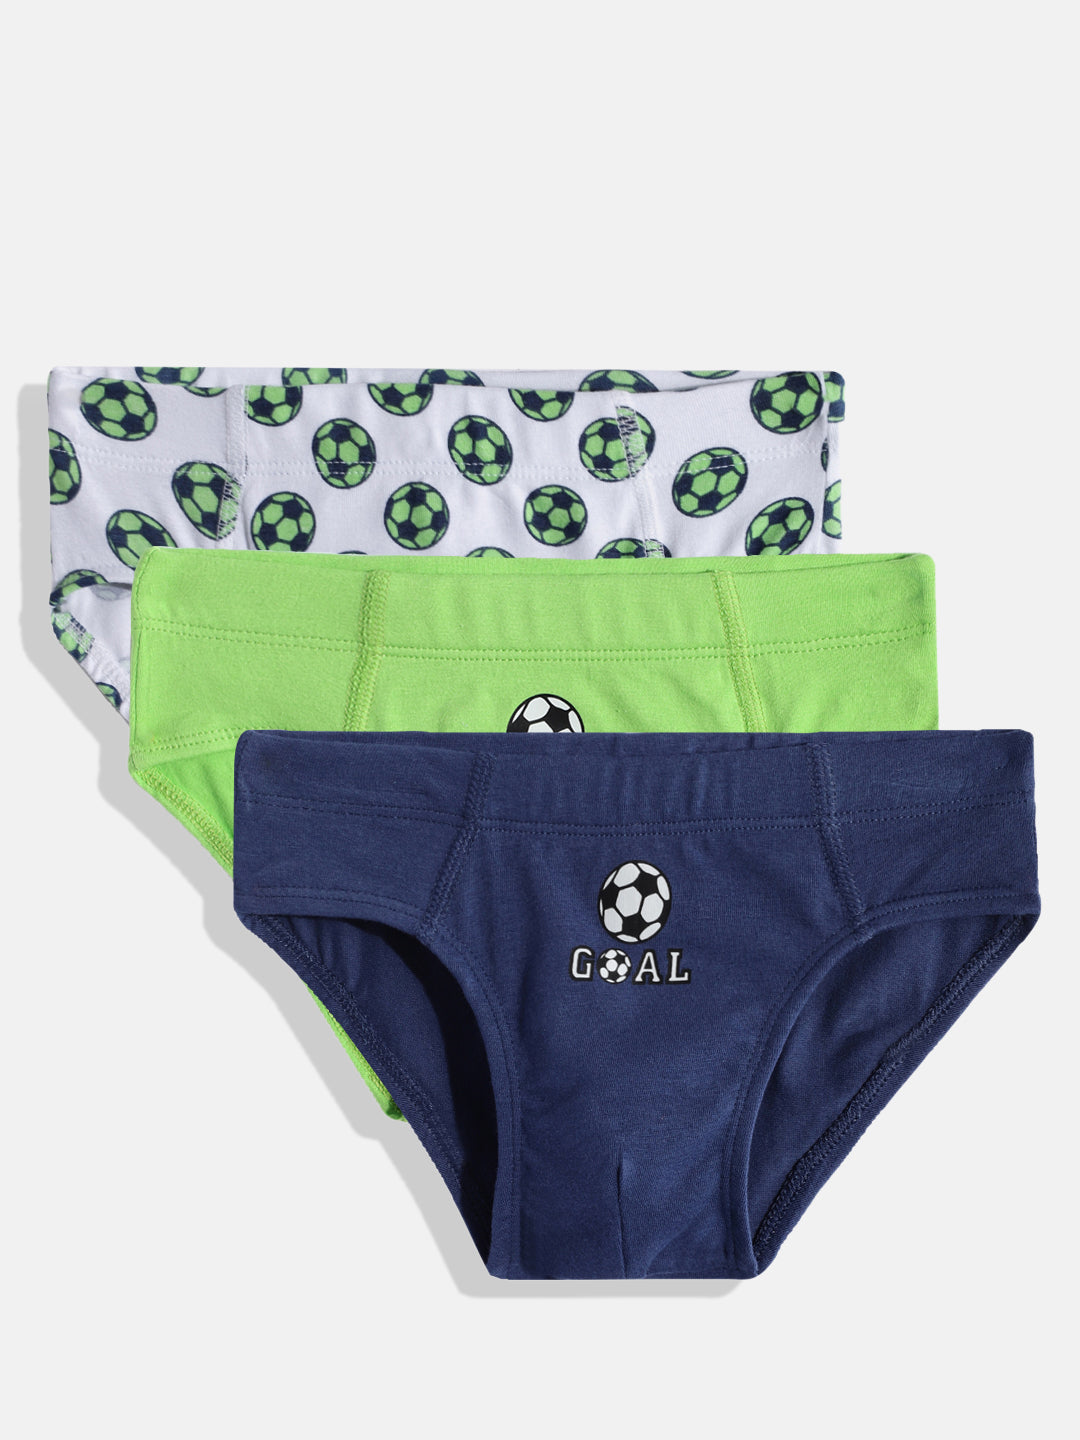 Boys Brief - Pack of 3